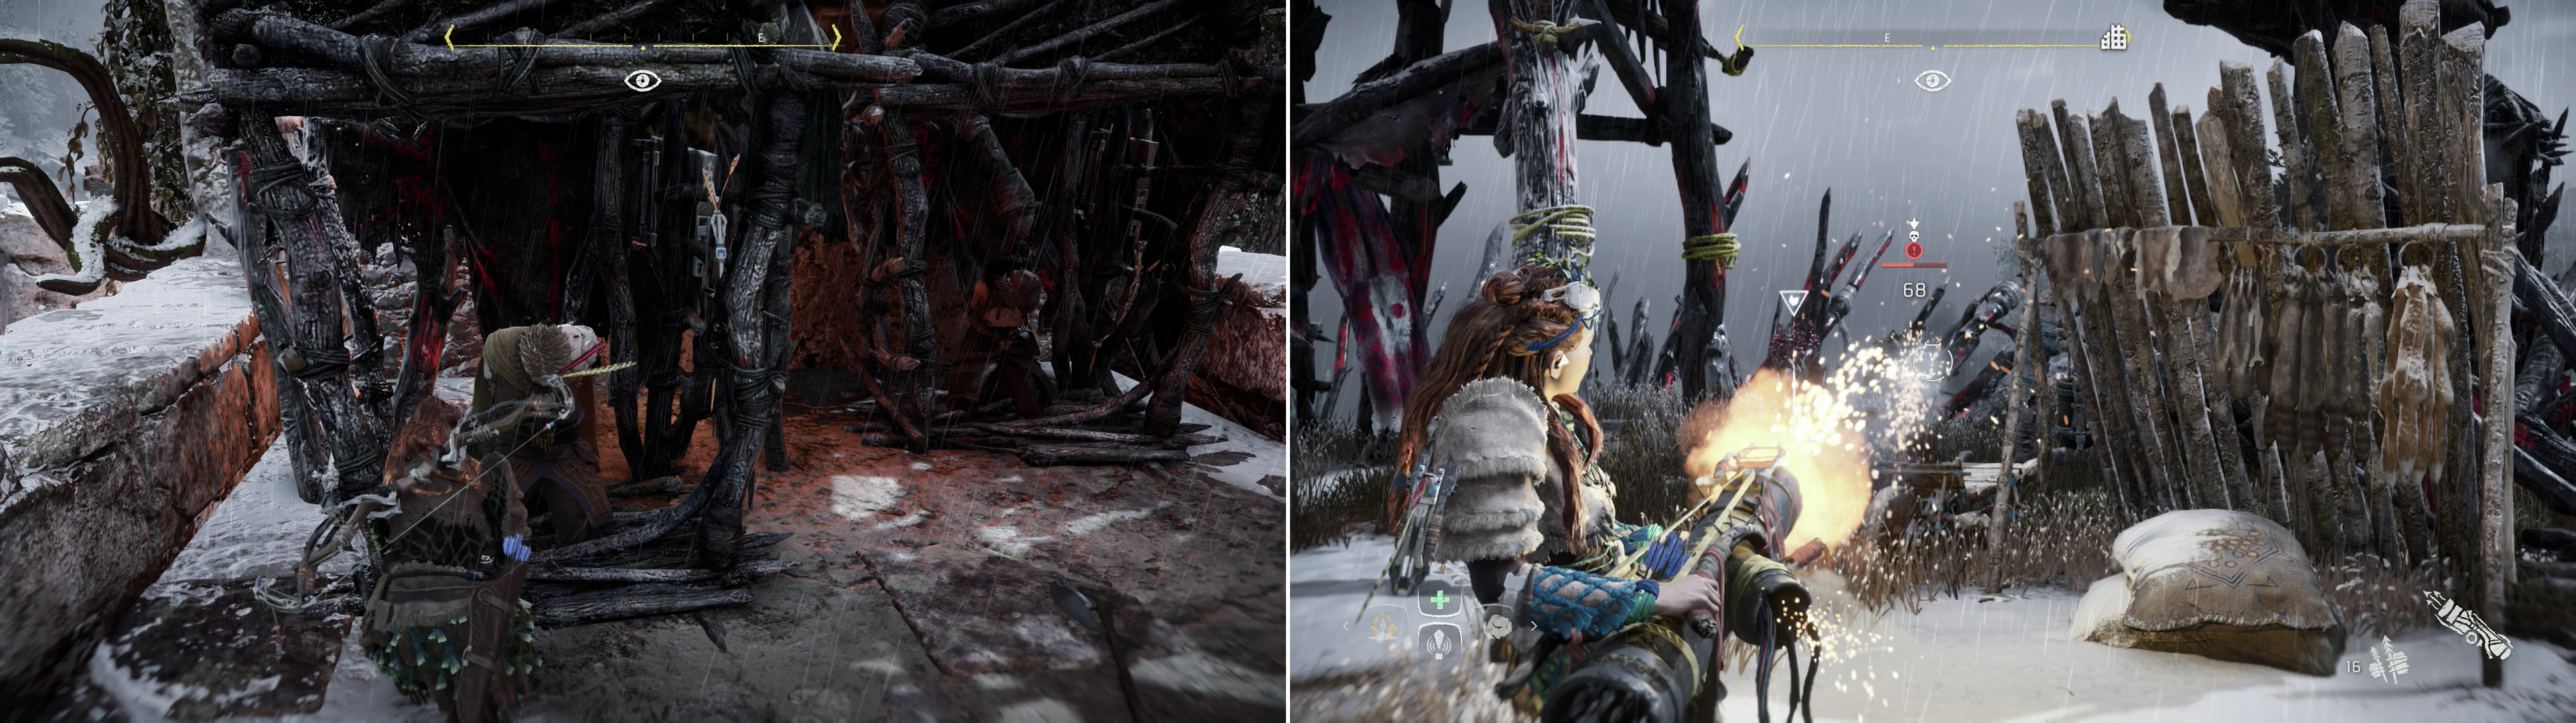 Free some prisoners to provide extra support (left). You can commandeer the Firespitter from a defeated Heavy to finish the camp with a bang (right).